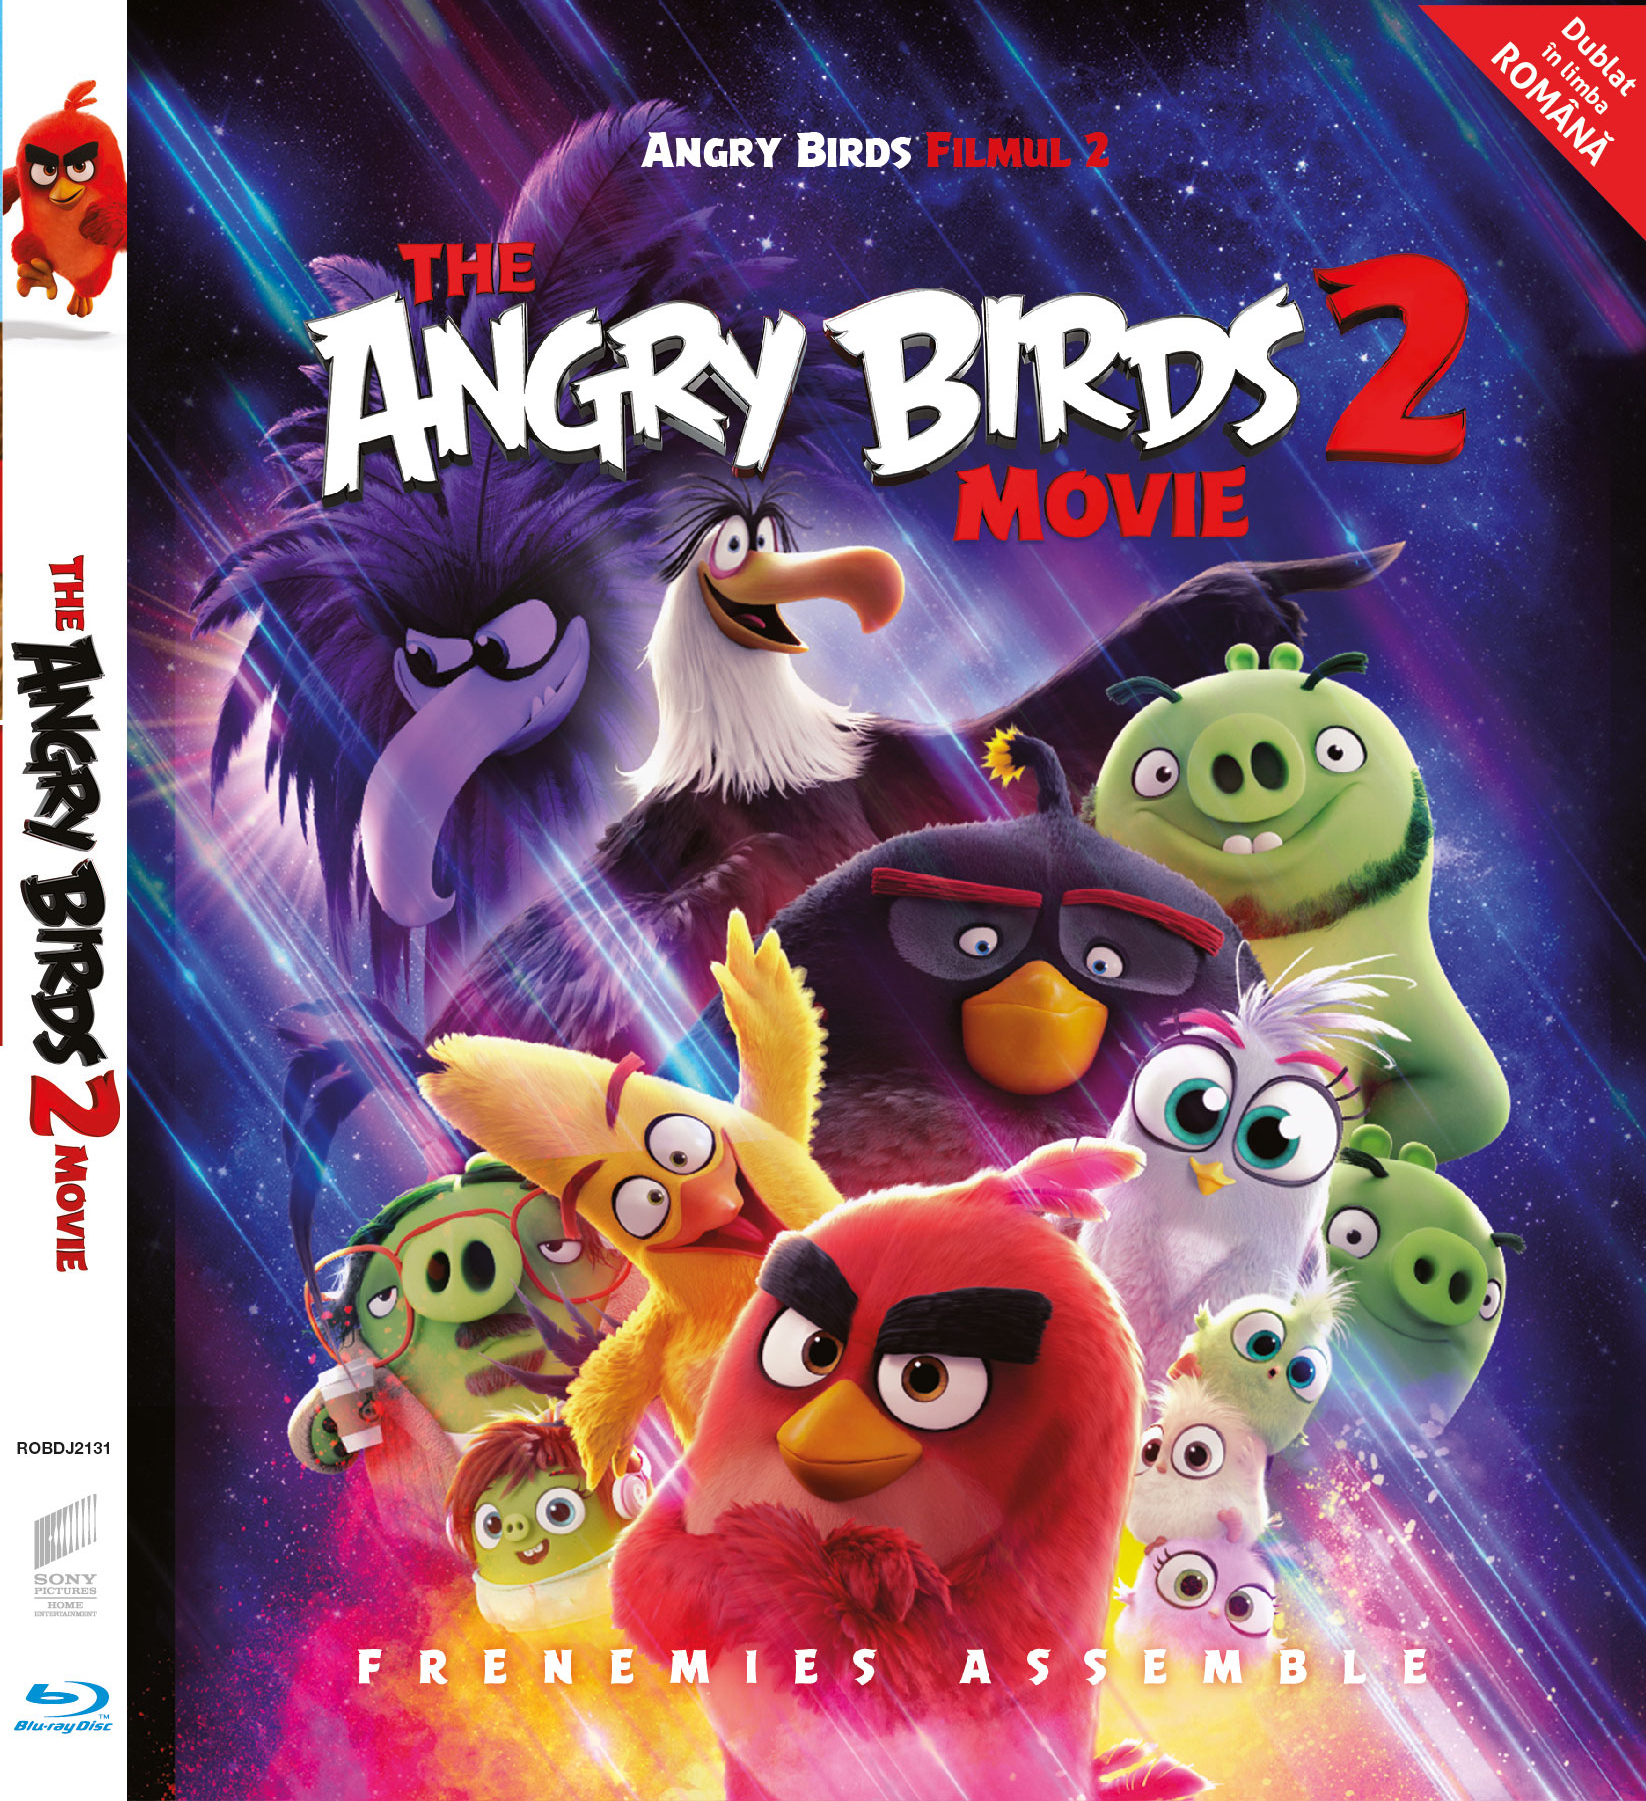 Angry Birds filmul 2 / The Angry Birds Movie 2 (Blu Ray Disc)